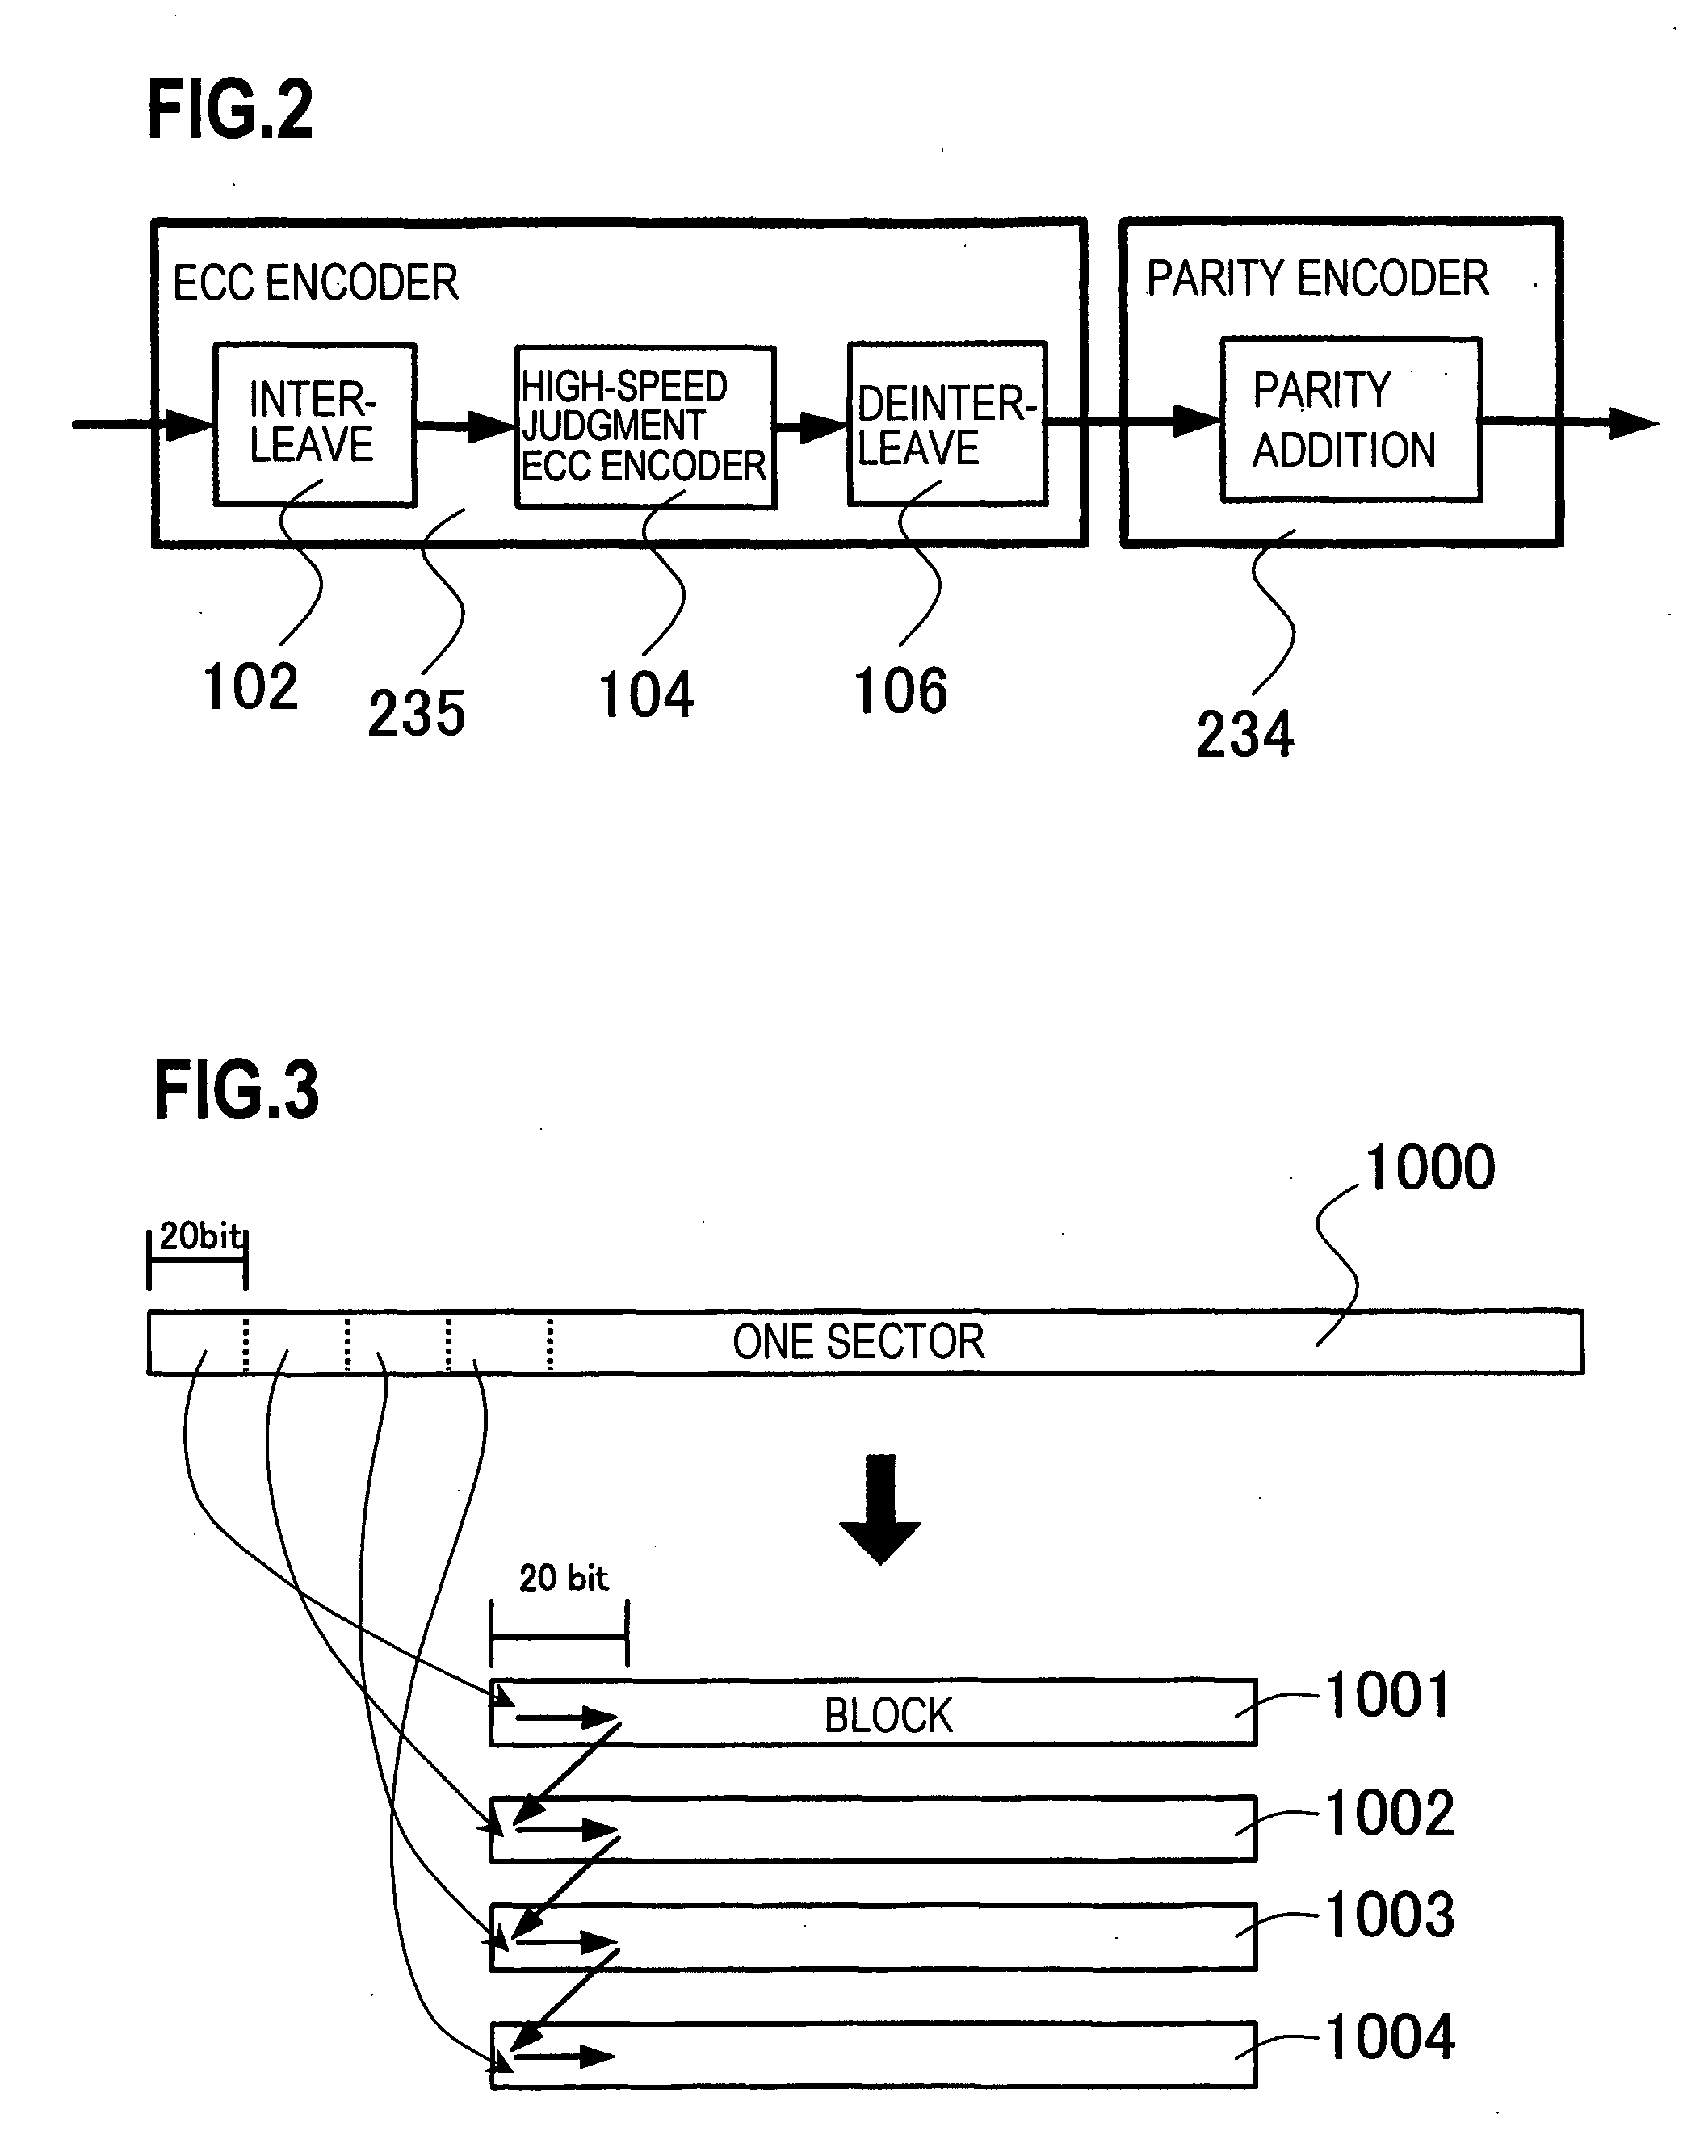 Encoding device, decoding device, encoding/decoding device and recording/reproducing device magnetic head and method of producing the same